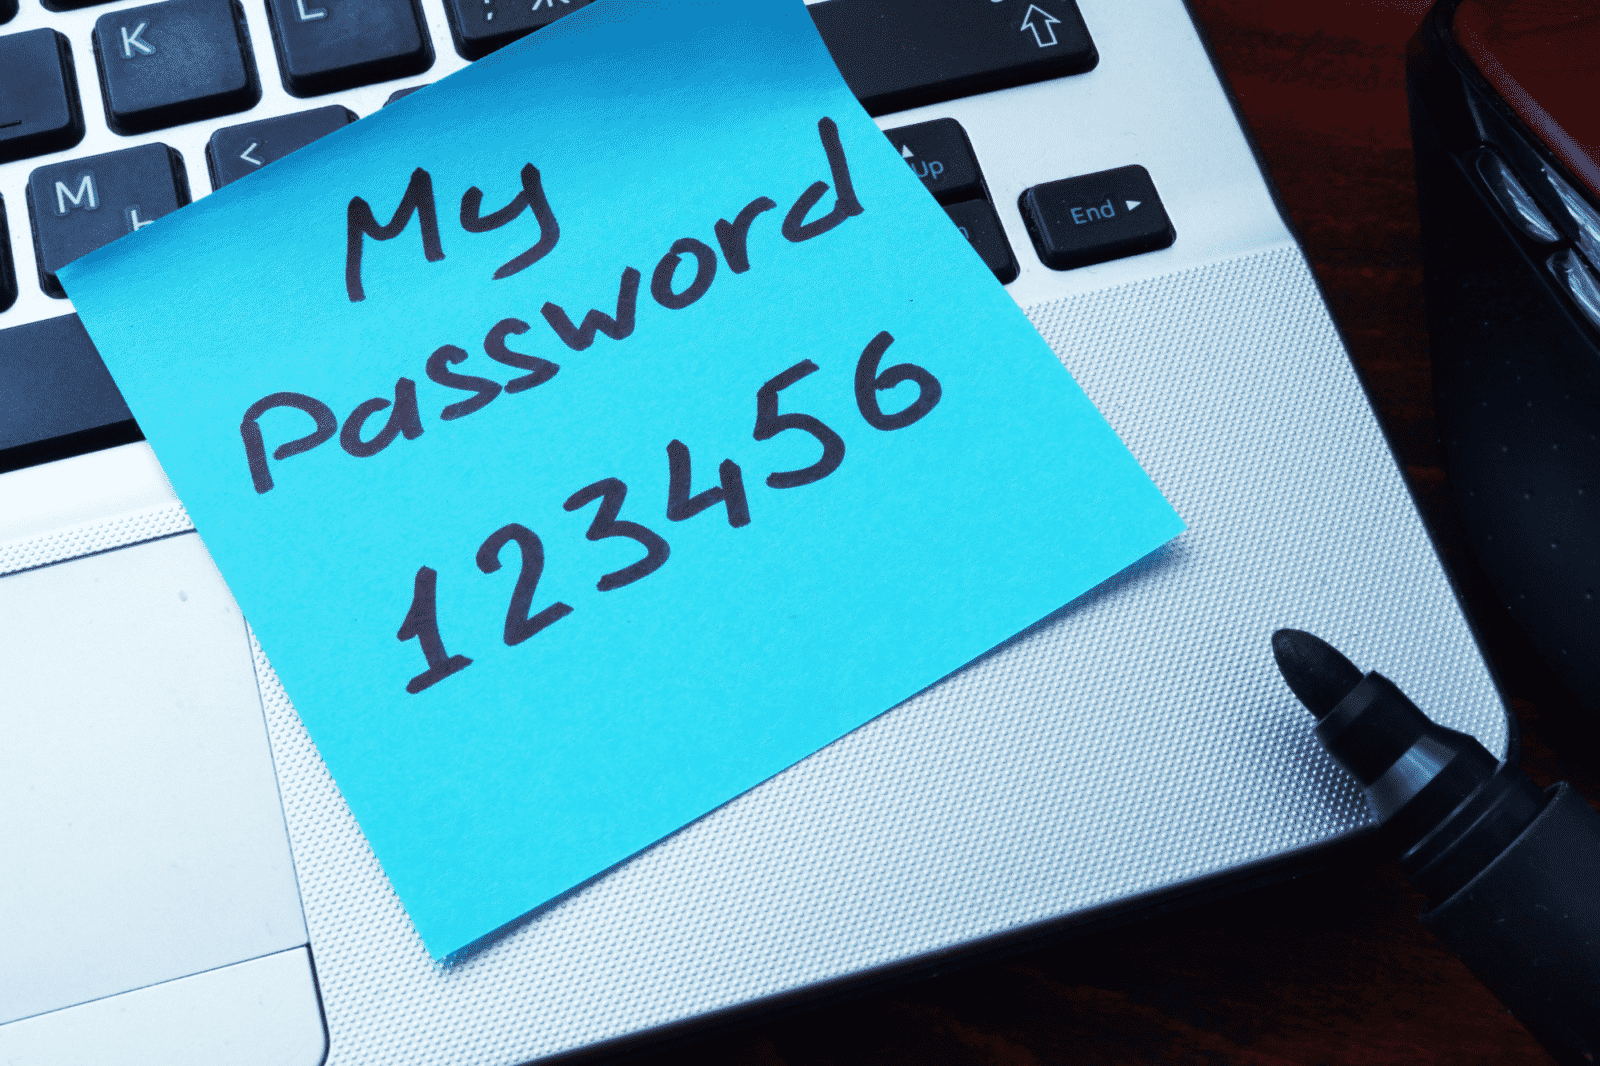 The Top 15 Most Used  Passwords Will Make You Laugh… or Cry